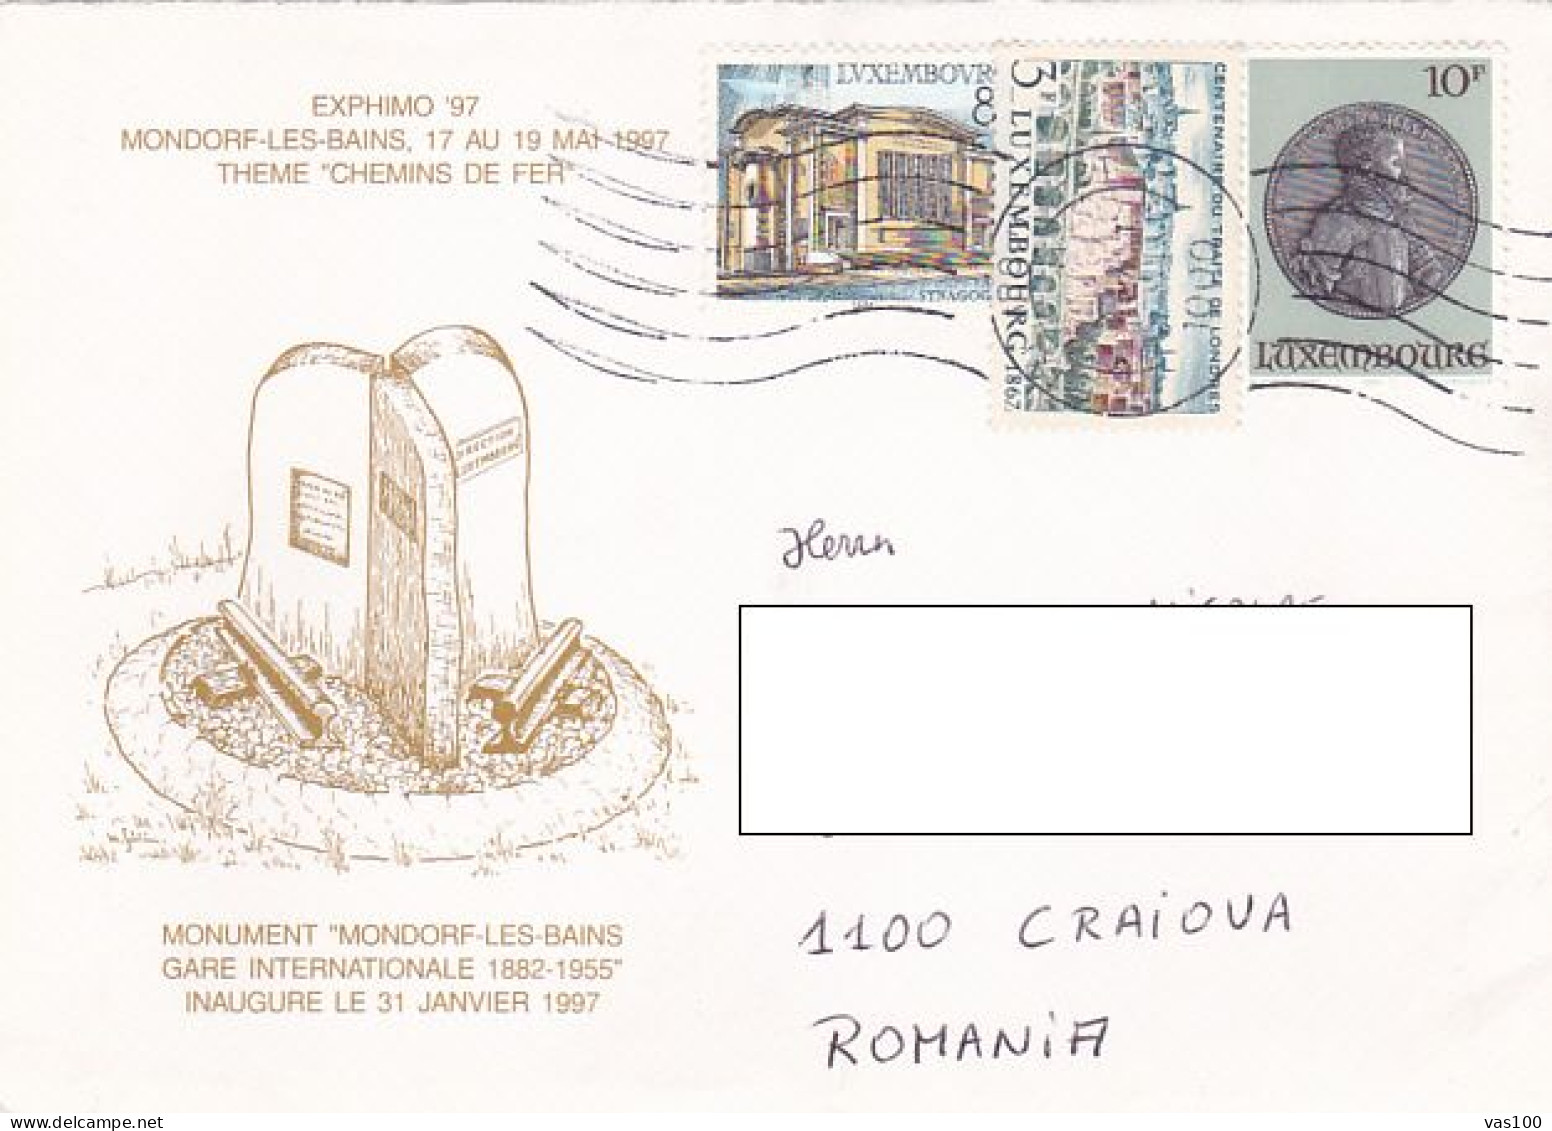 SYNAGOGUE, LONDON TREATY, KING PHILIP II OF SPAIN, STAMPS ON RAILWAYS MONUMENT SPECIAL COVER, 2001, LUXEMBOURG - Storia Postale